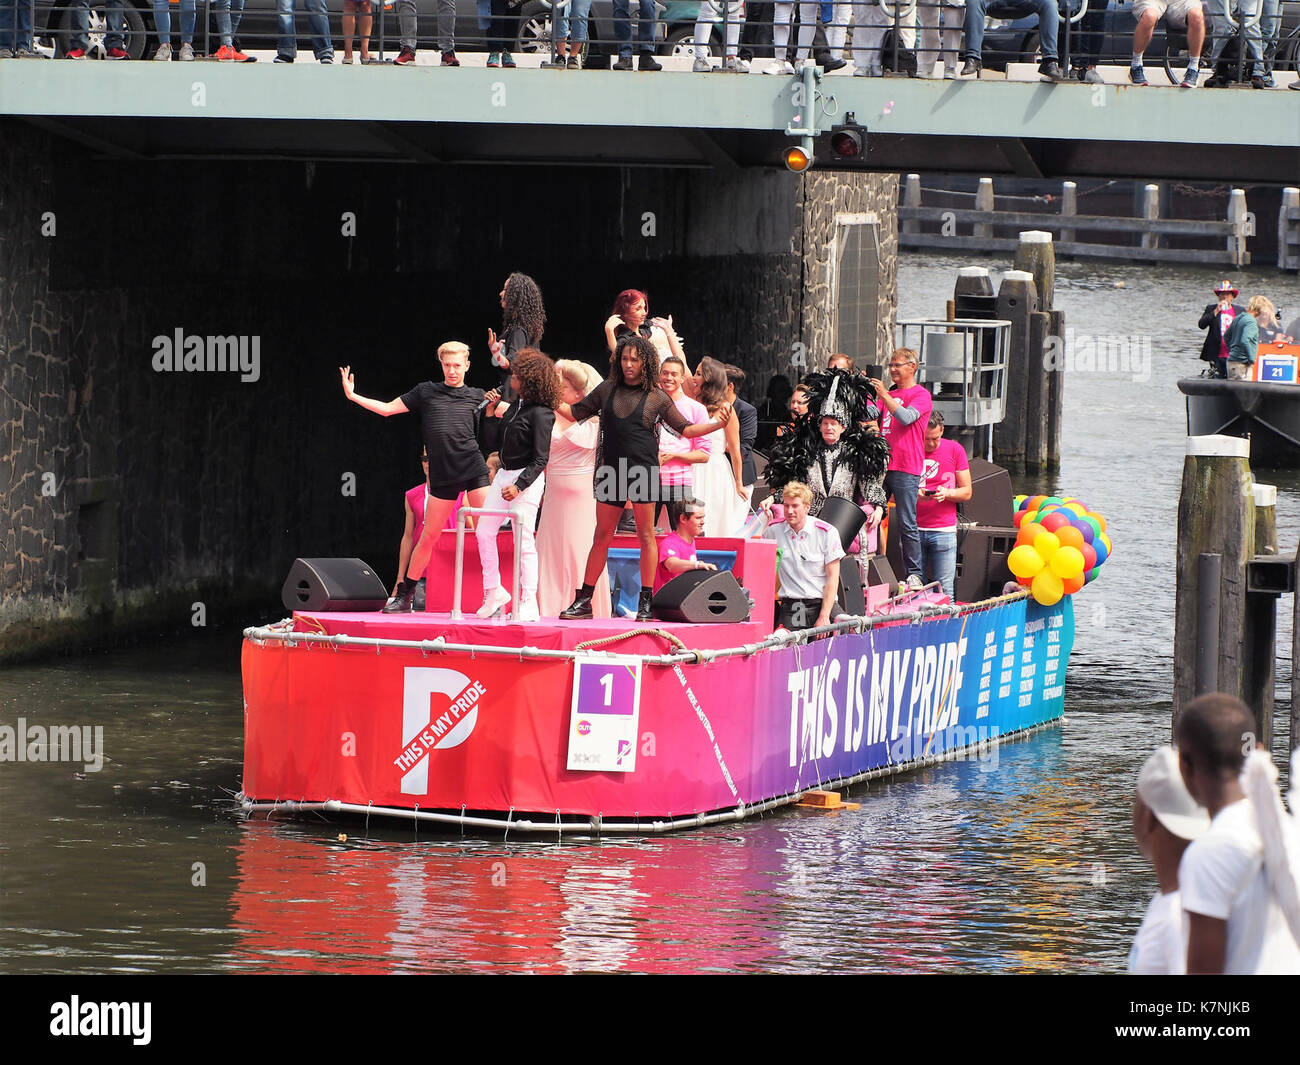 Boat 1 This is my pride, Canal Parade Amsterdam 2017 foto 2 Stock Photo